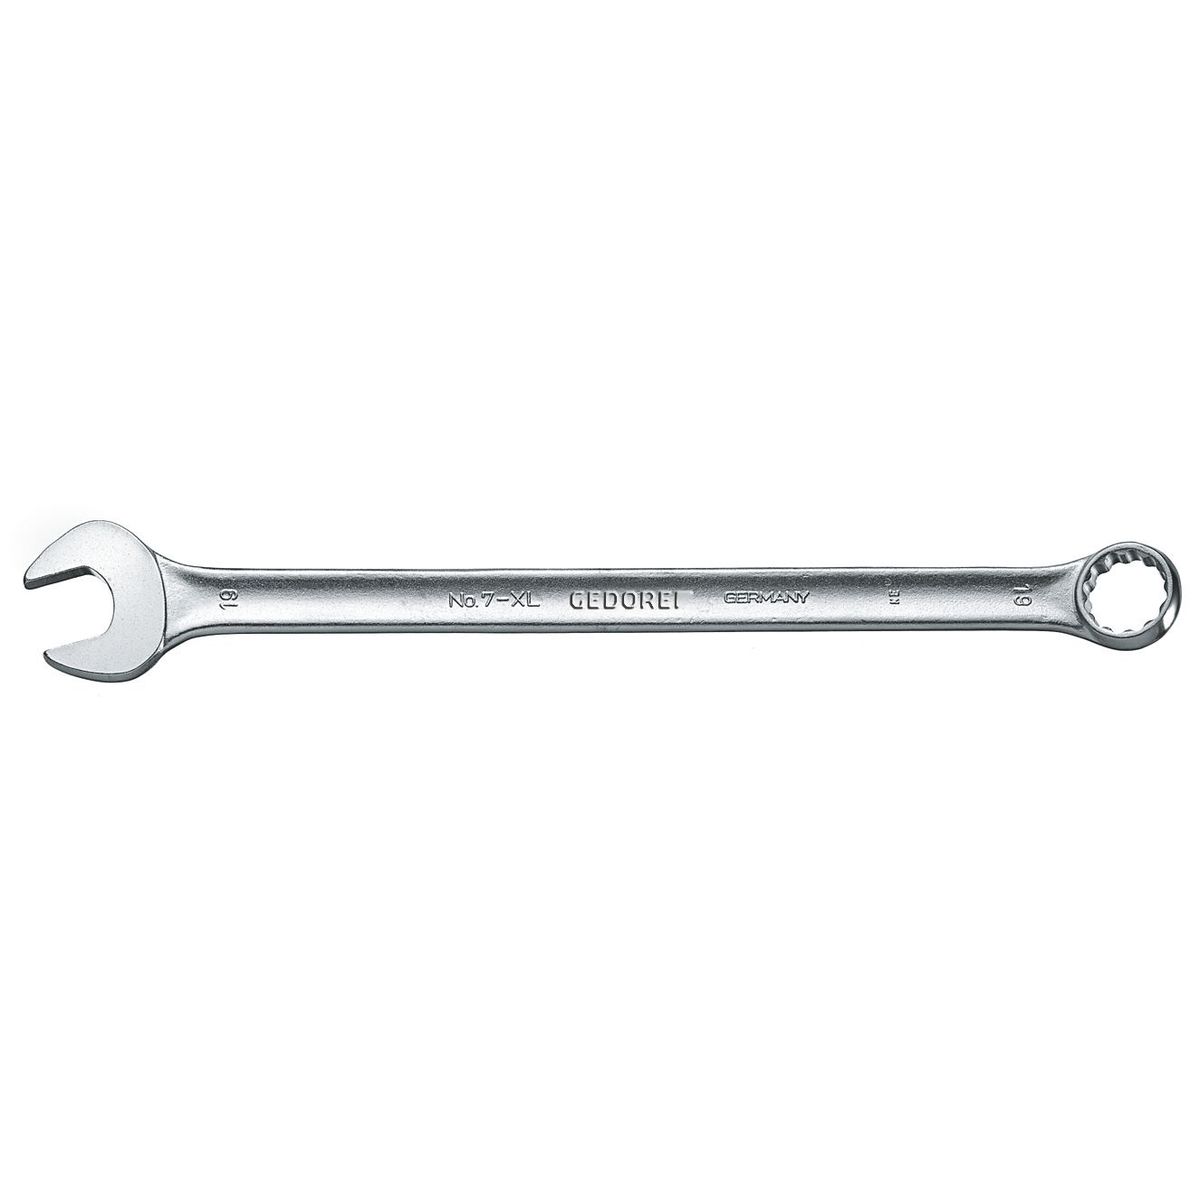 Combination spanner, extra long 14mm No.7 XL 14 Gedore